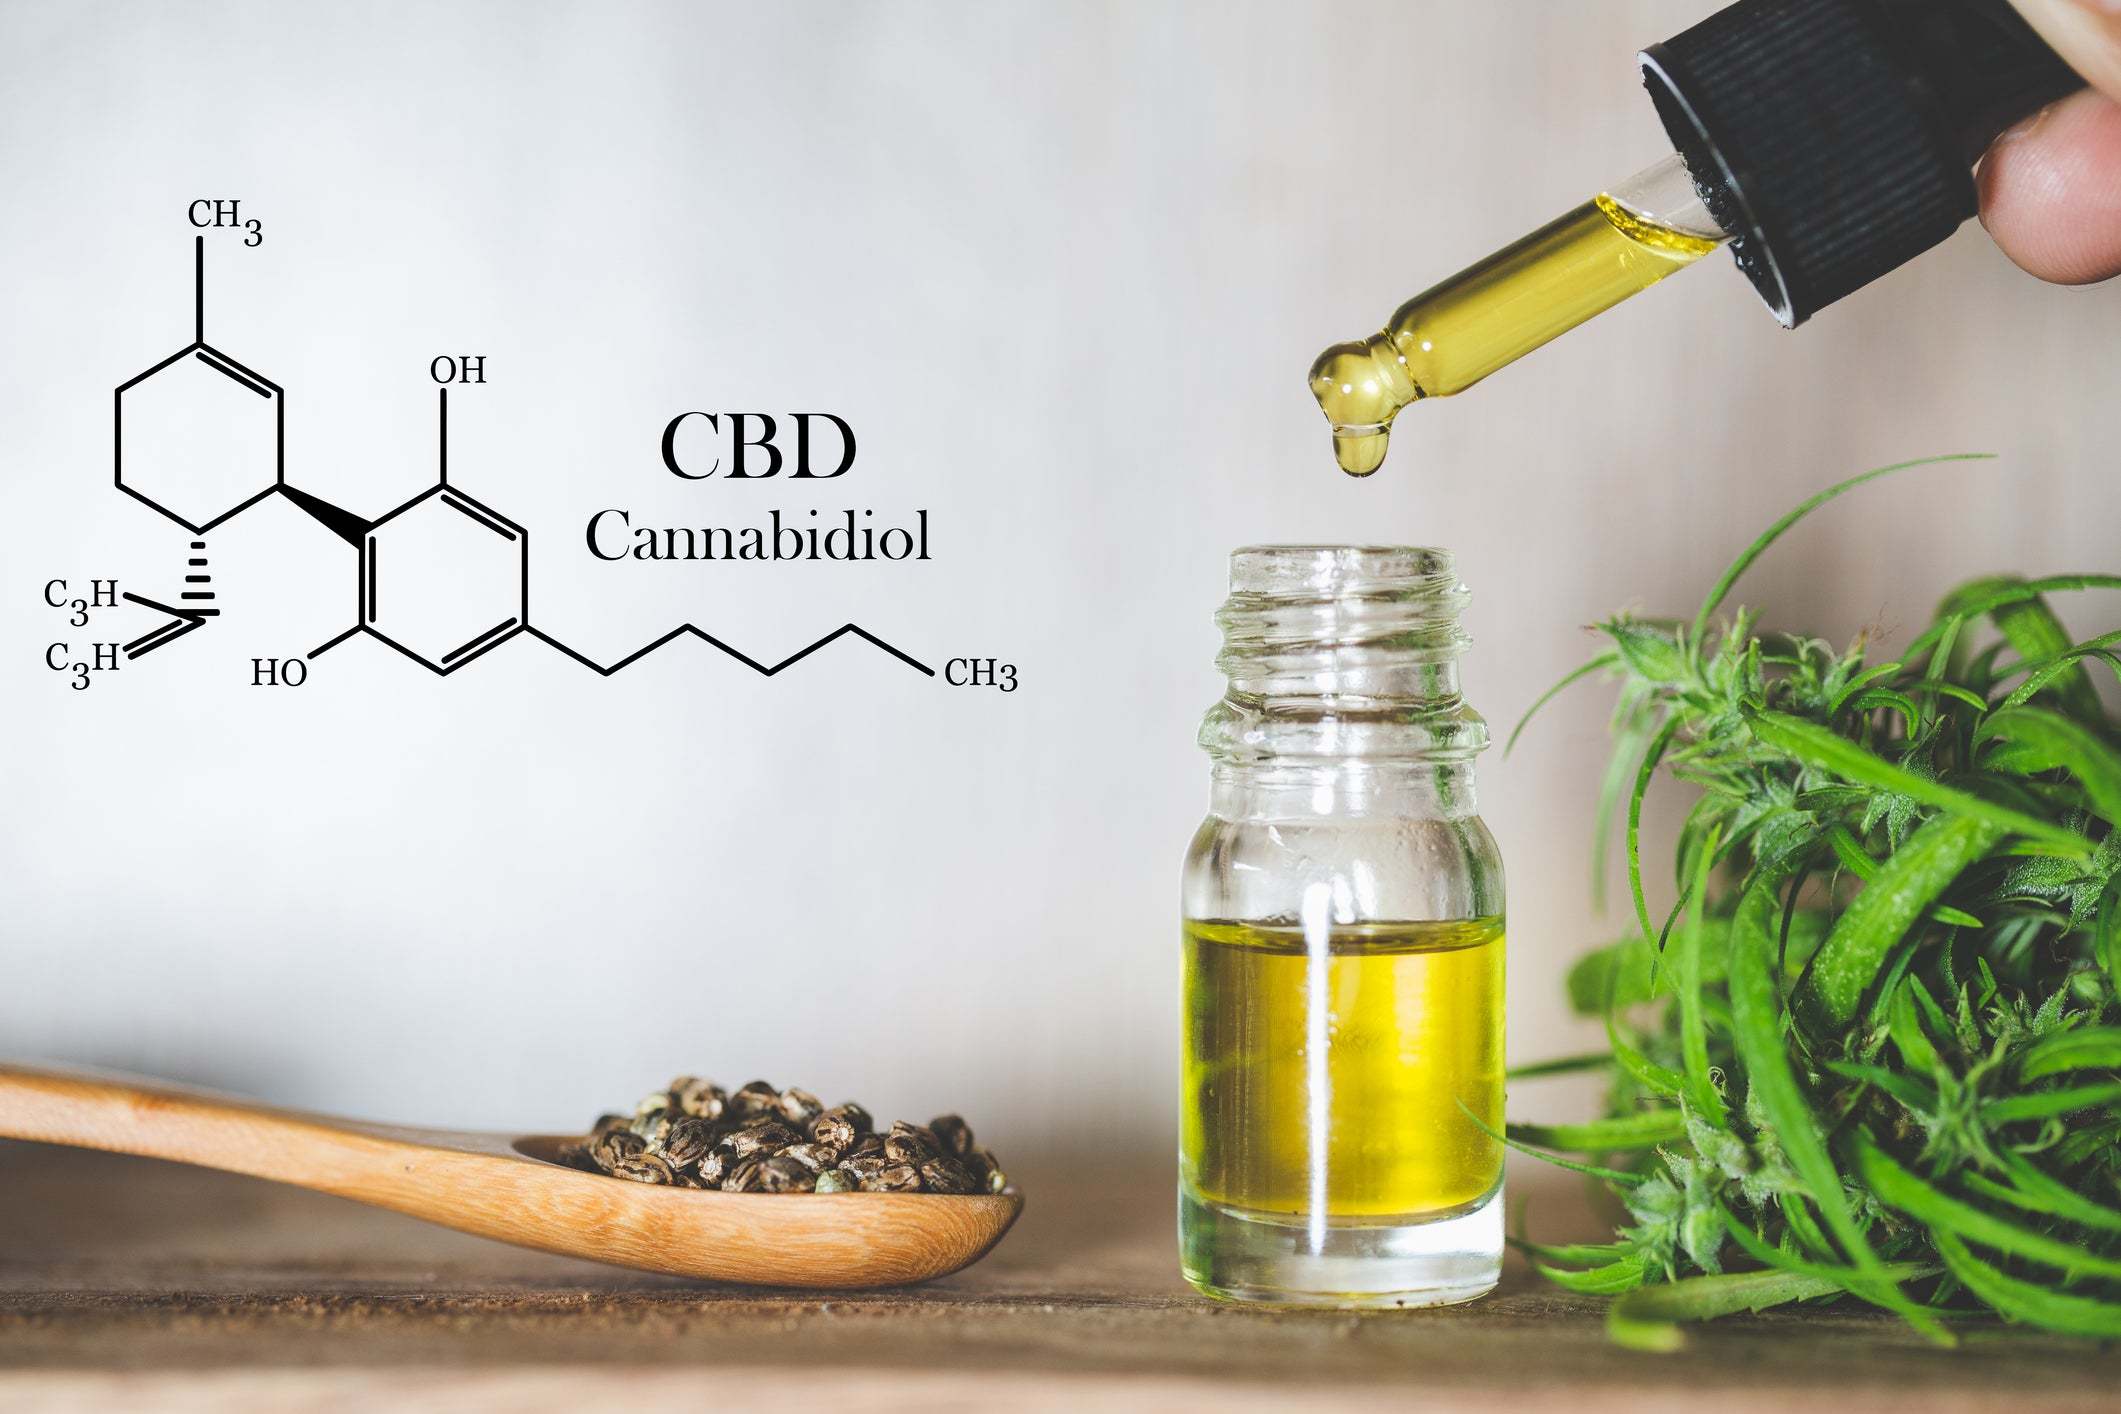 How CBD Oil Prices Have Changed from 2012 to Today